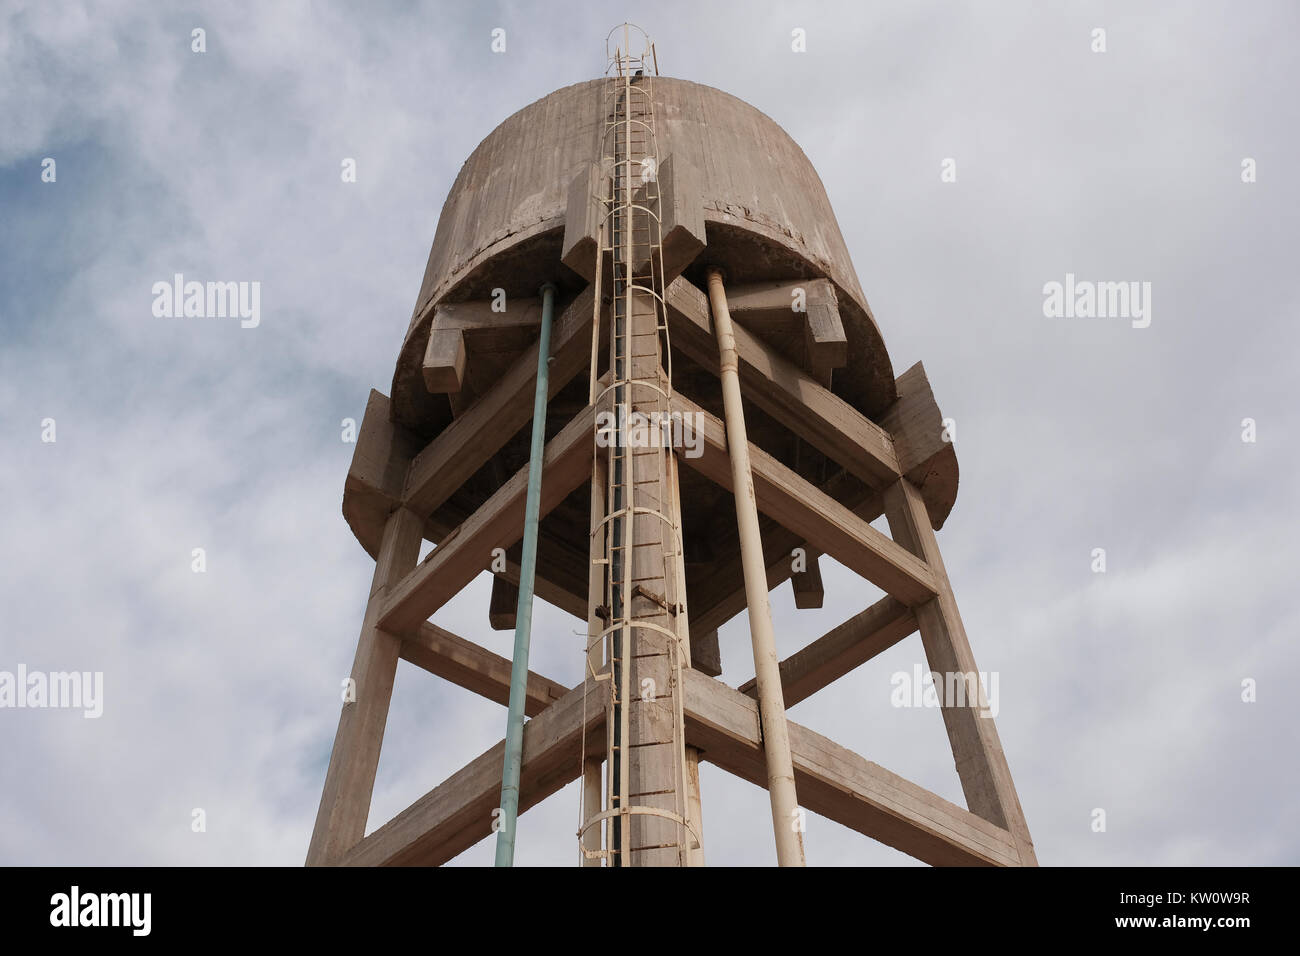 Old concrete water reservoir tower in the agricultural community of Hatzeva located in the western of the Arabah valley known in Hebrew as Arava or Aravah which forms part of the border between Israel and Jordan. Stock Photo